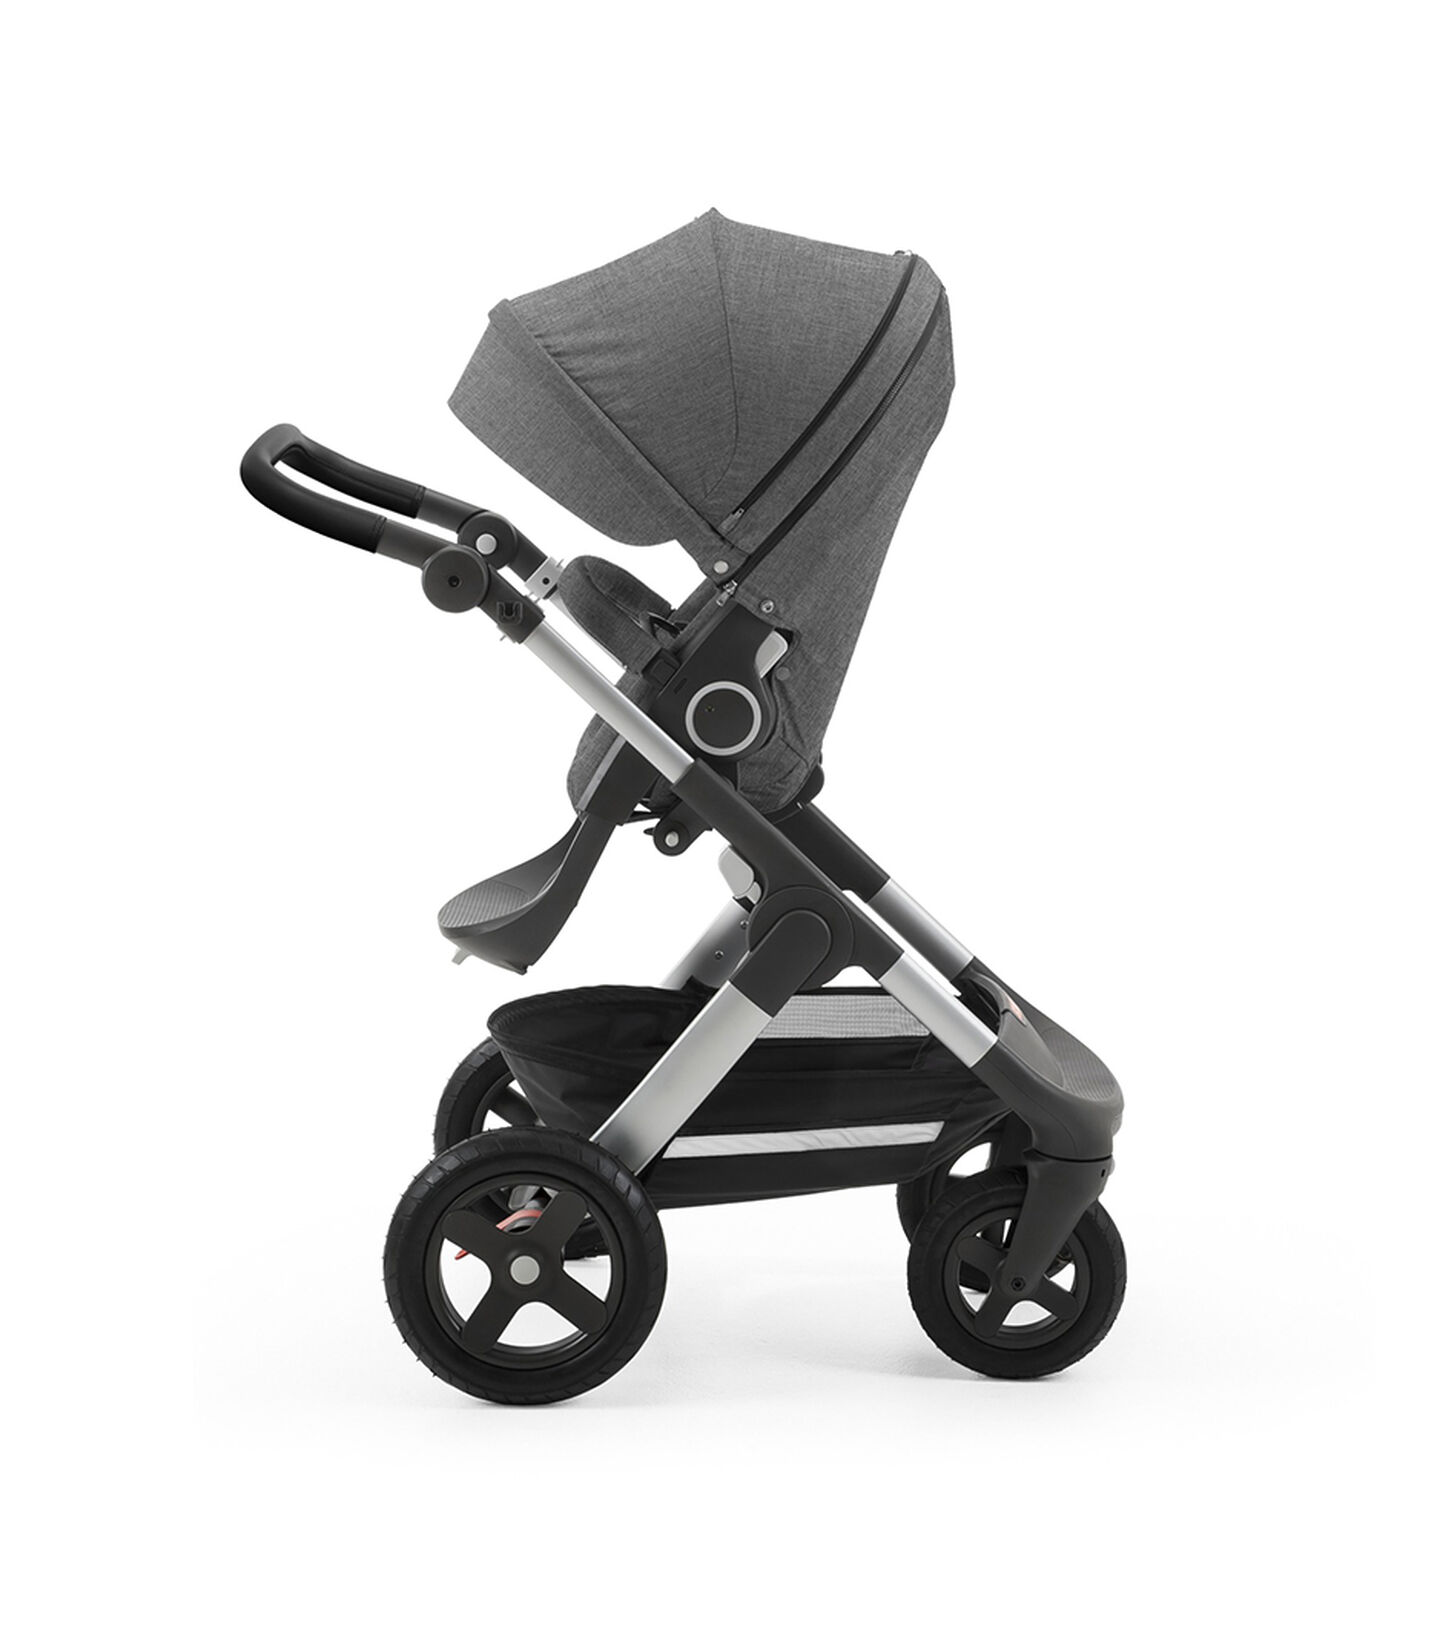 Stokke® Trailz with silver chassis and Stokke® Stroller Seat, parent facing, active position. Black Melange. Terrain wheels. Leatherette Handle. view 2